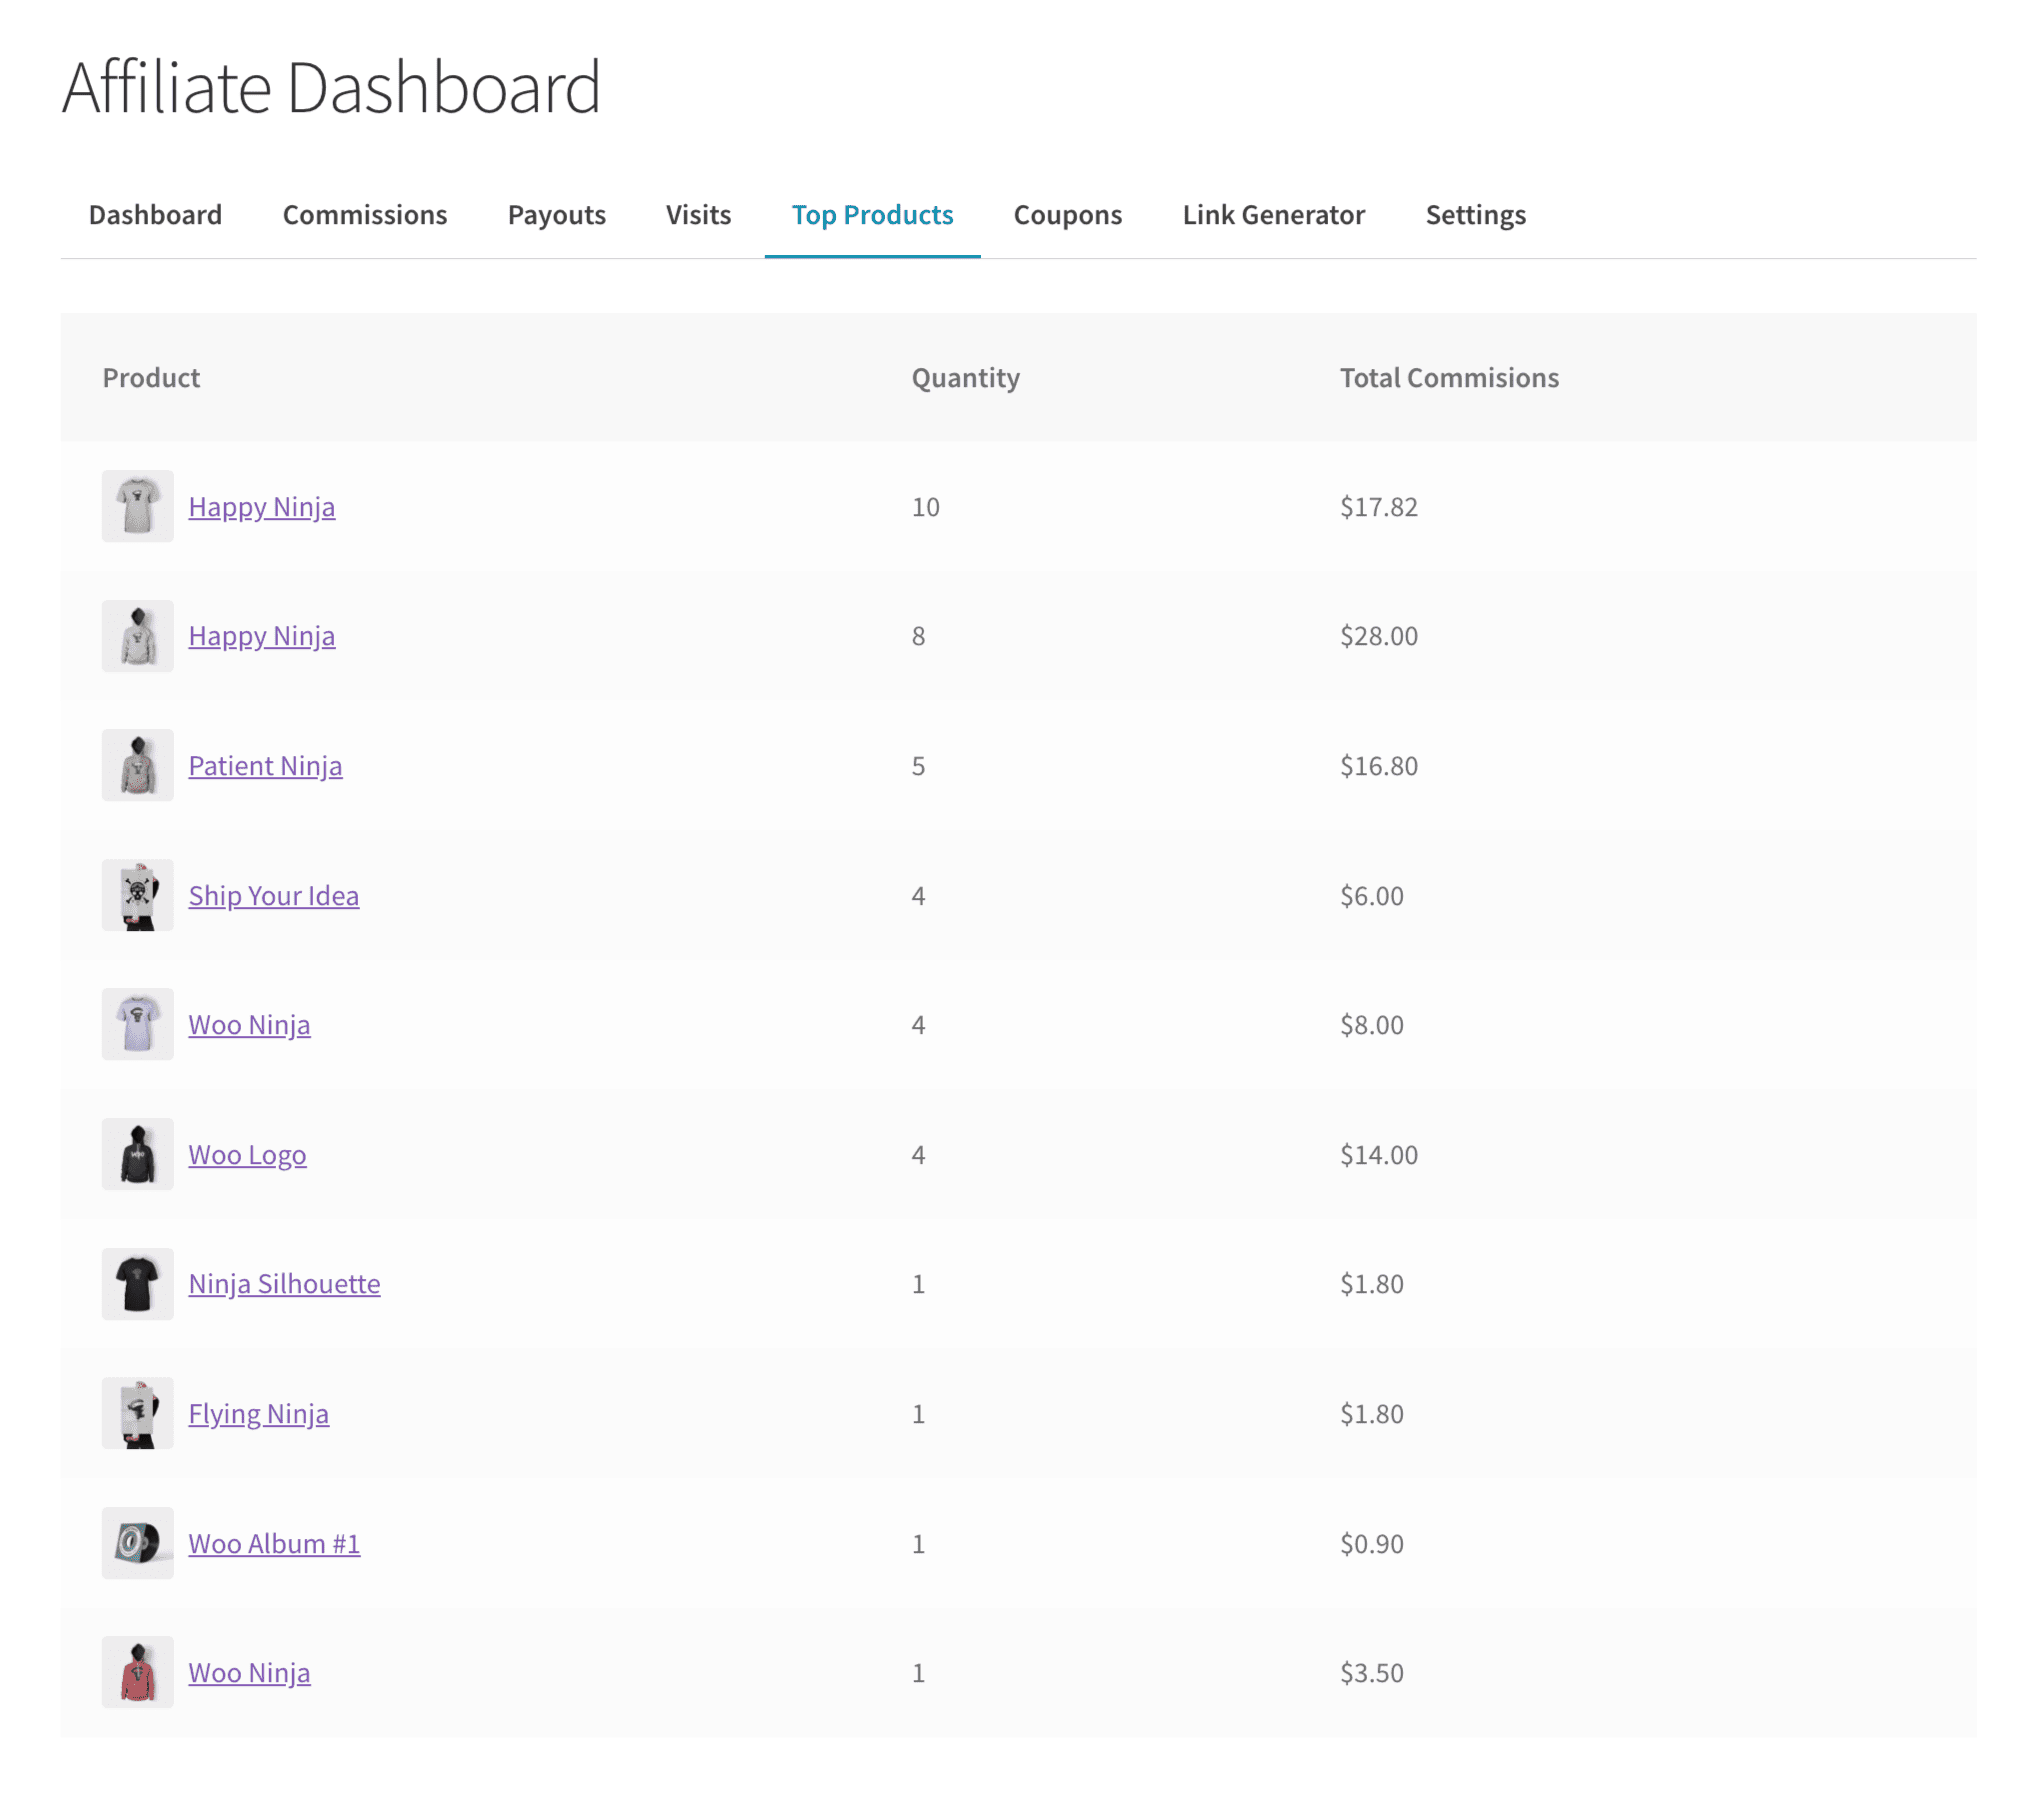 Affiliates for WooCommerce Top Products Section